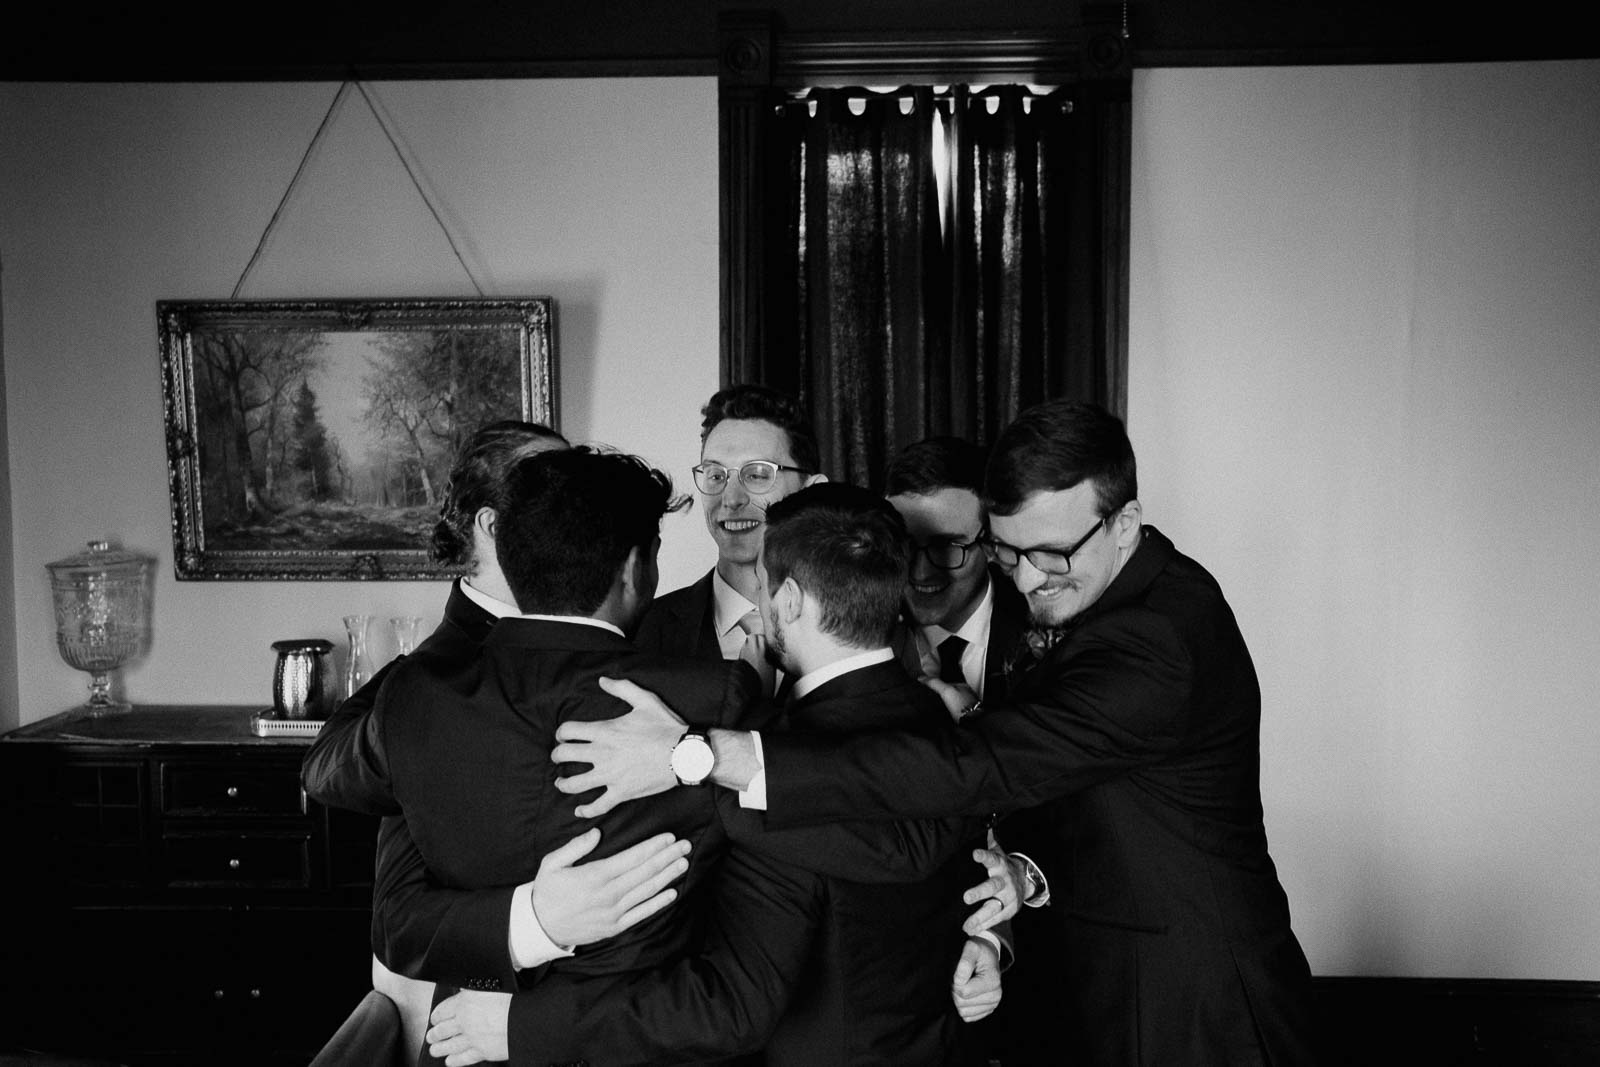 All the groomsmen hug in one huddle with the groom